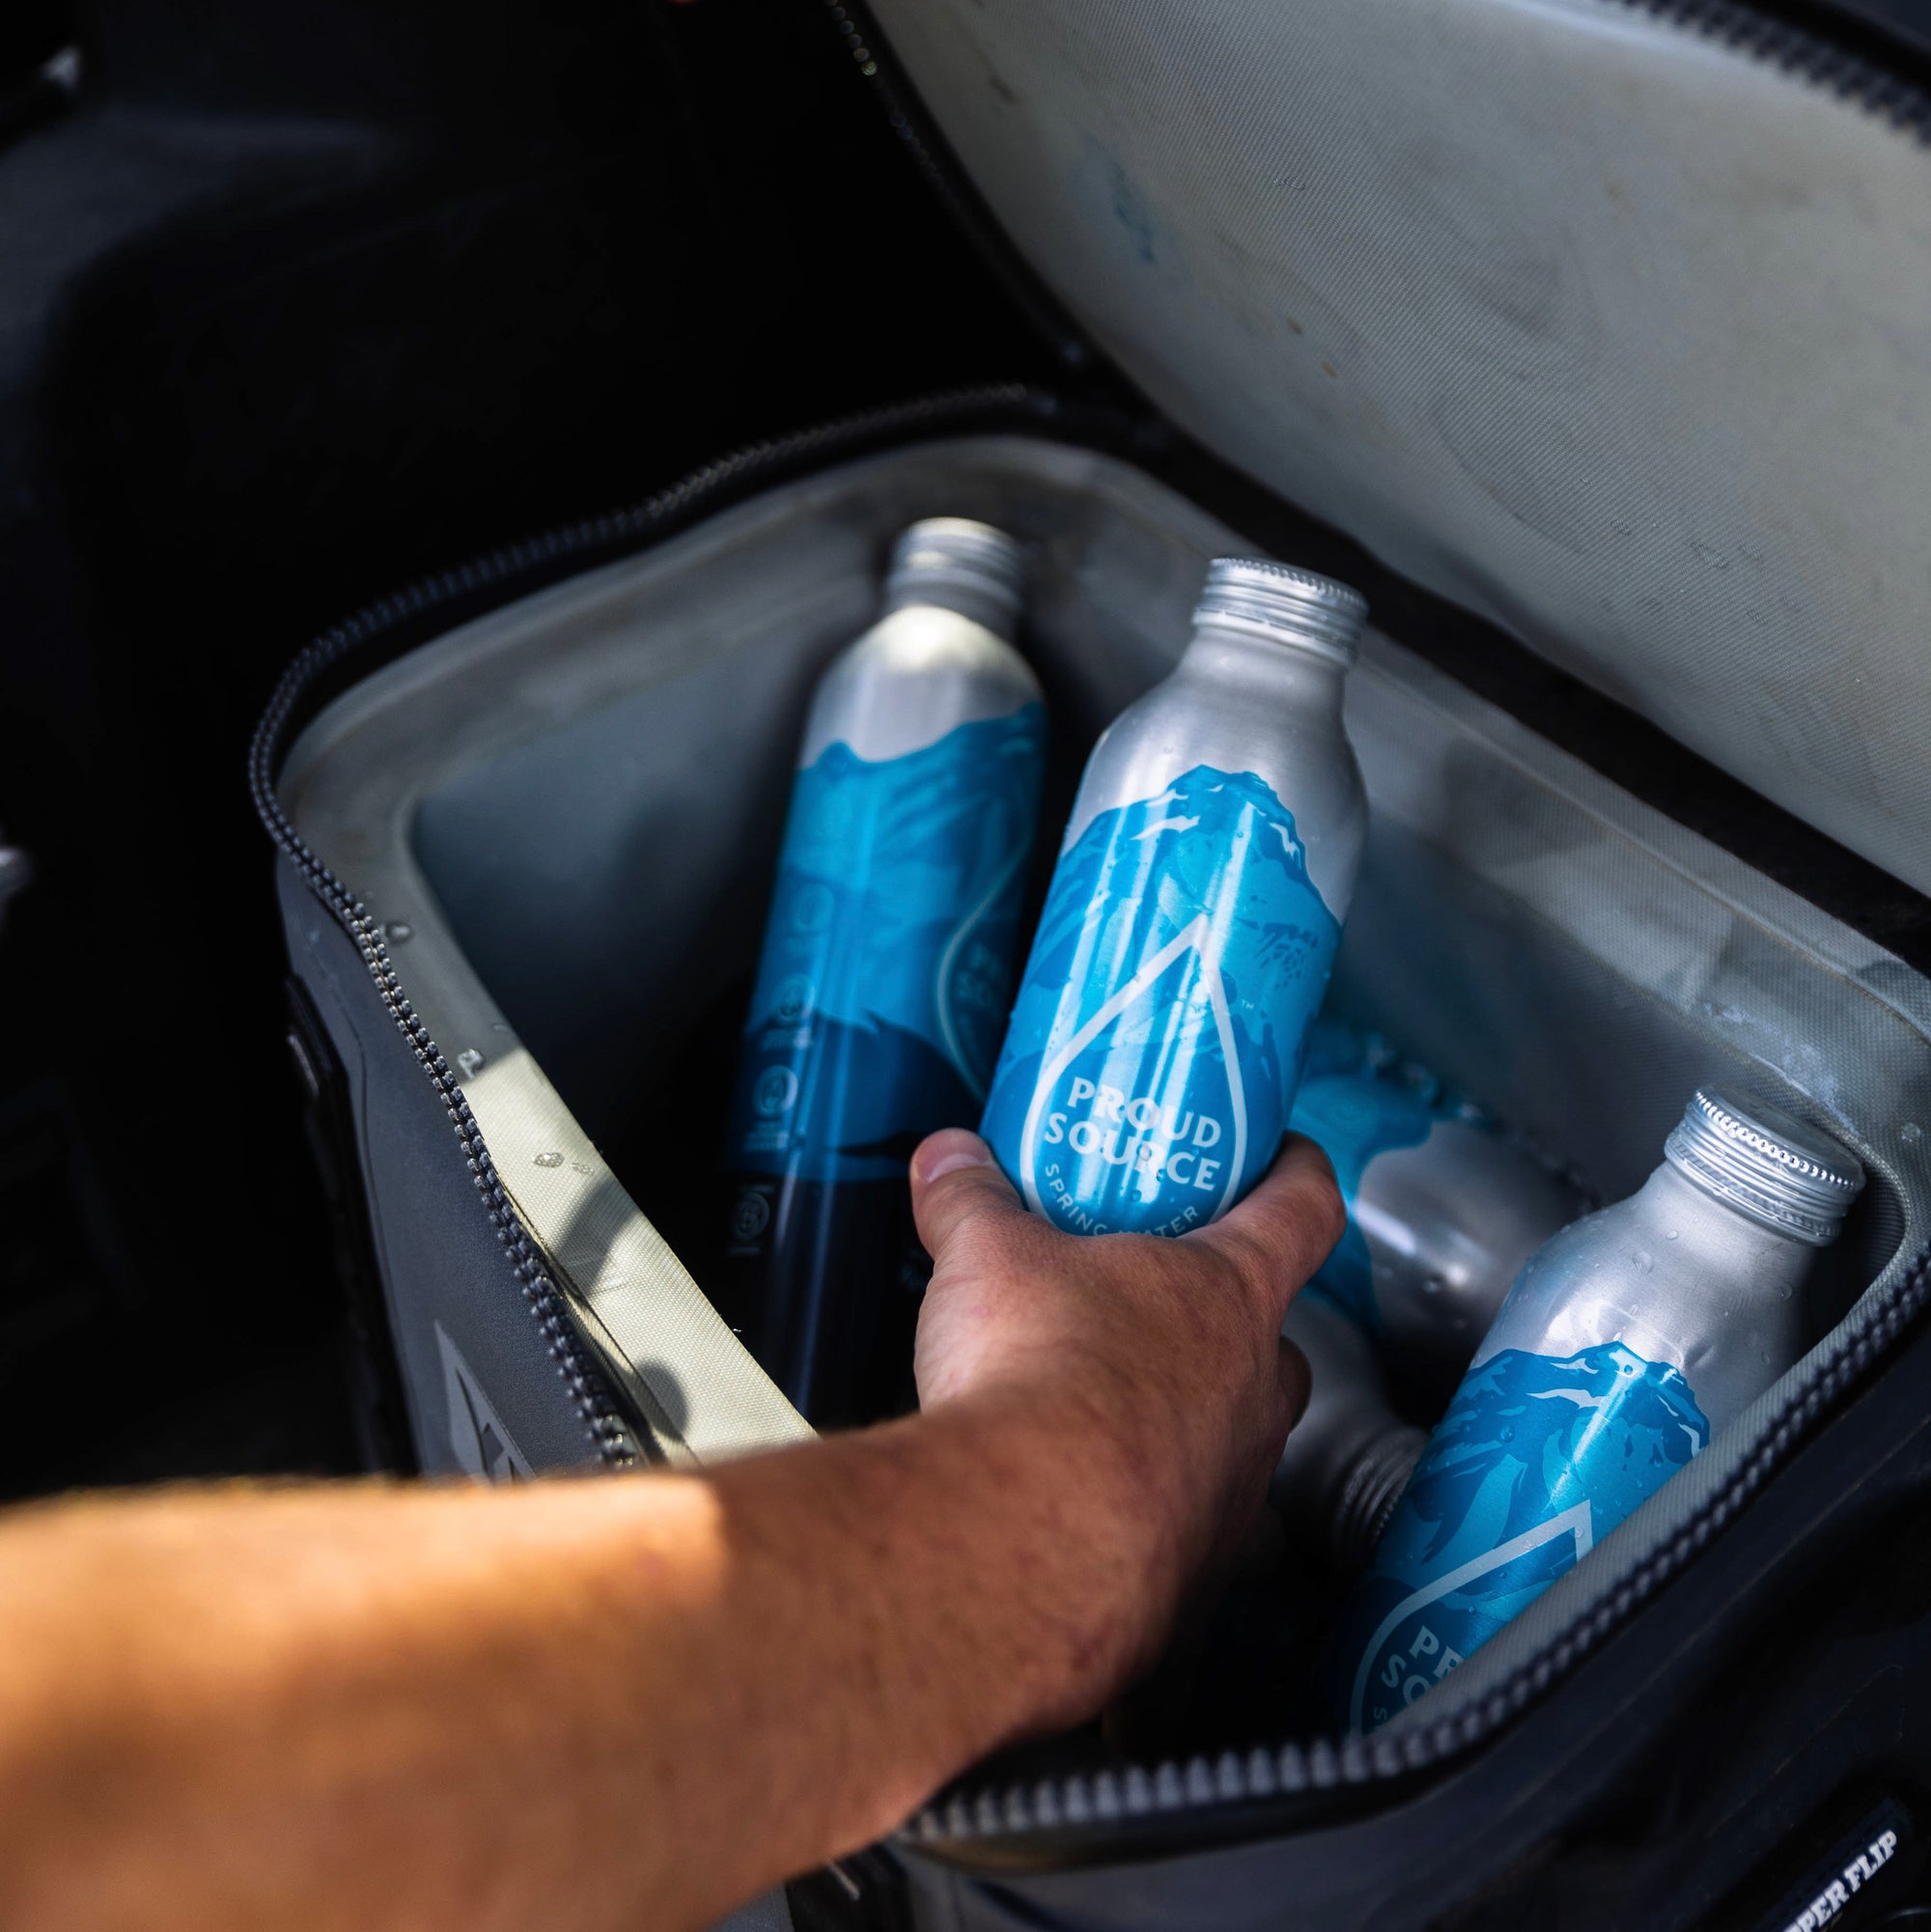 Overland Expo & Proud Source Water Launch the Infinite Bottle Project